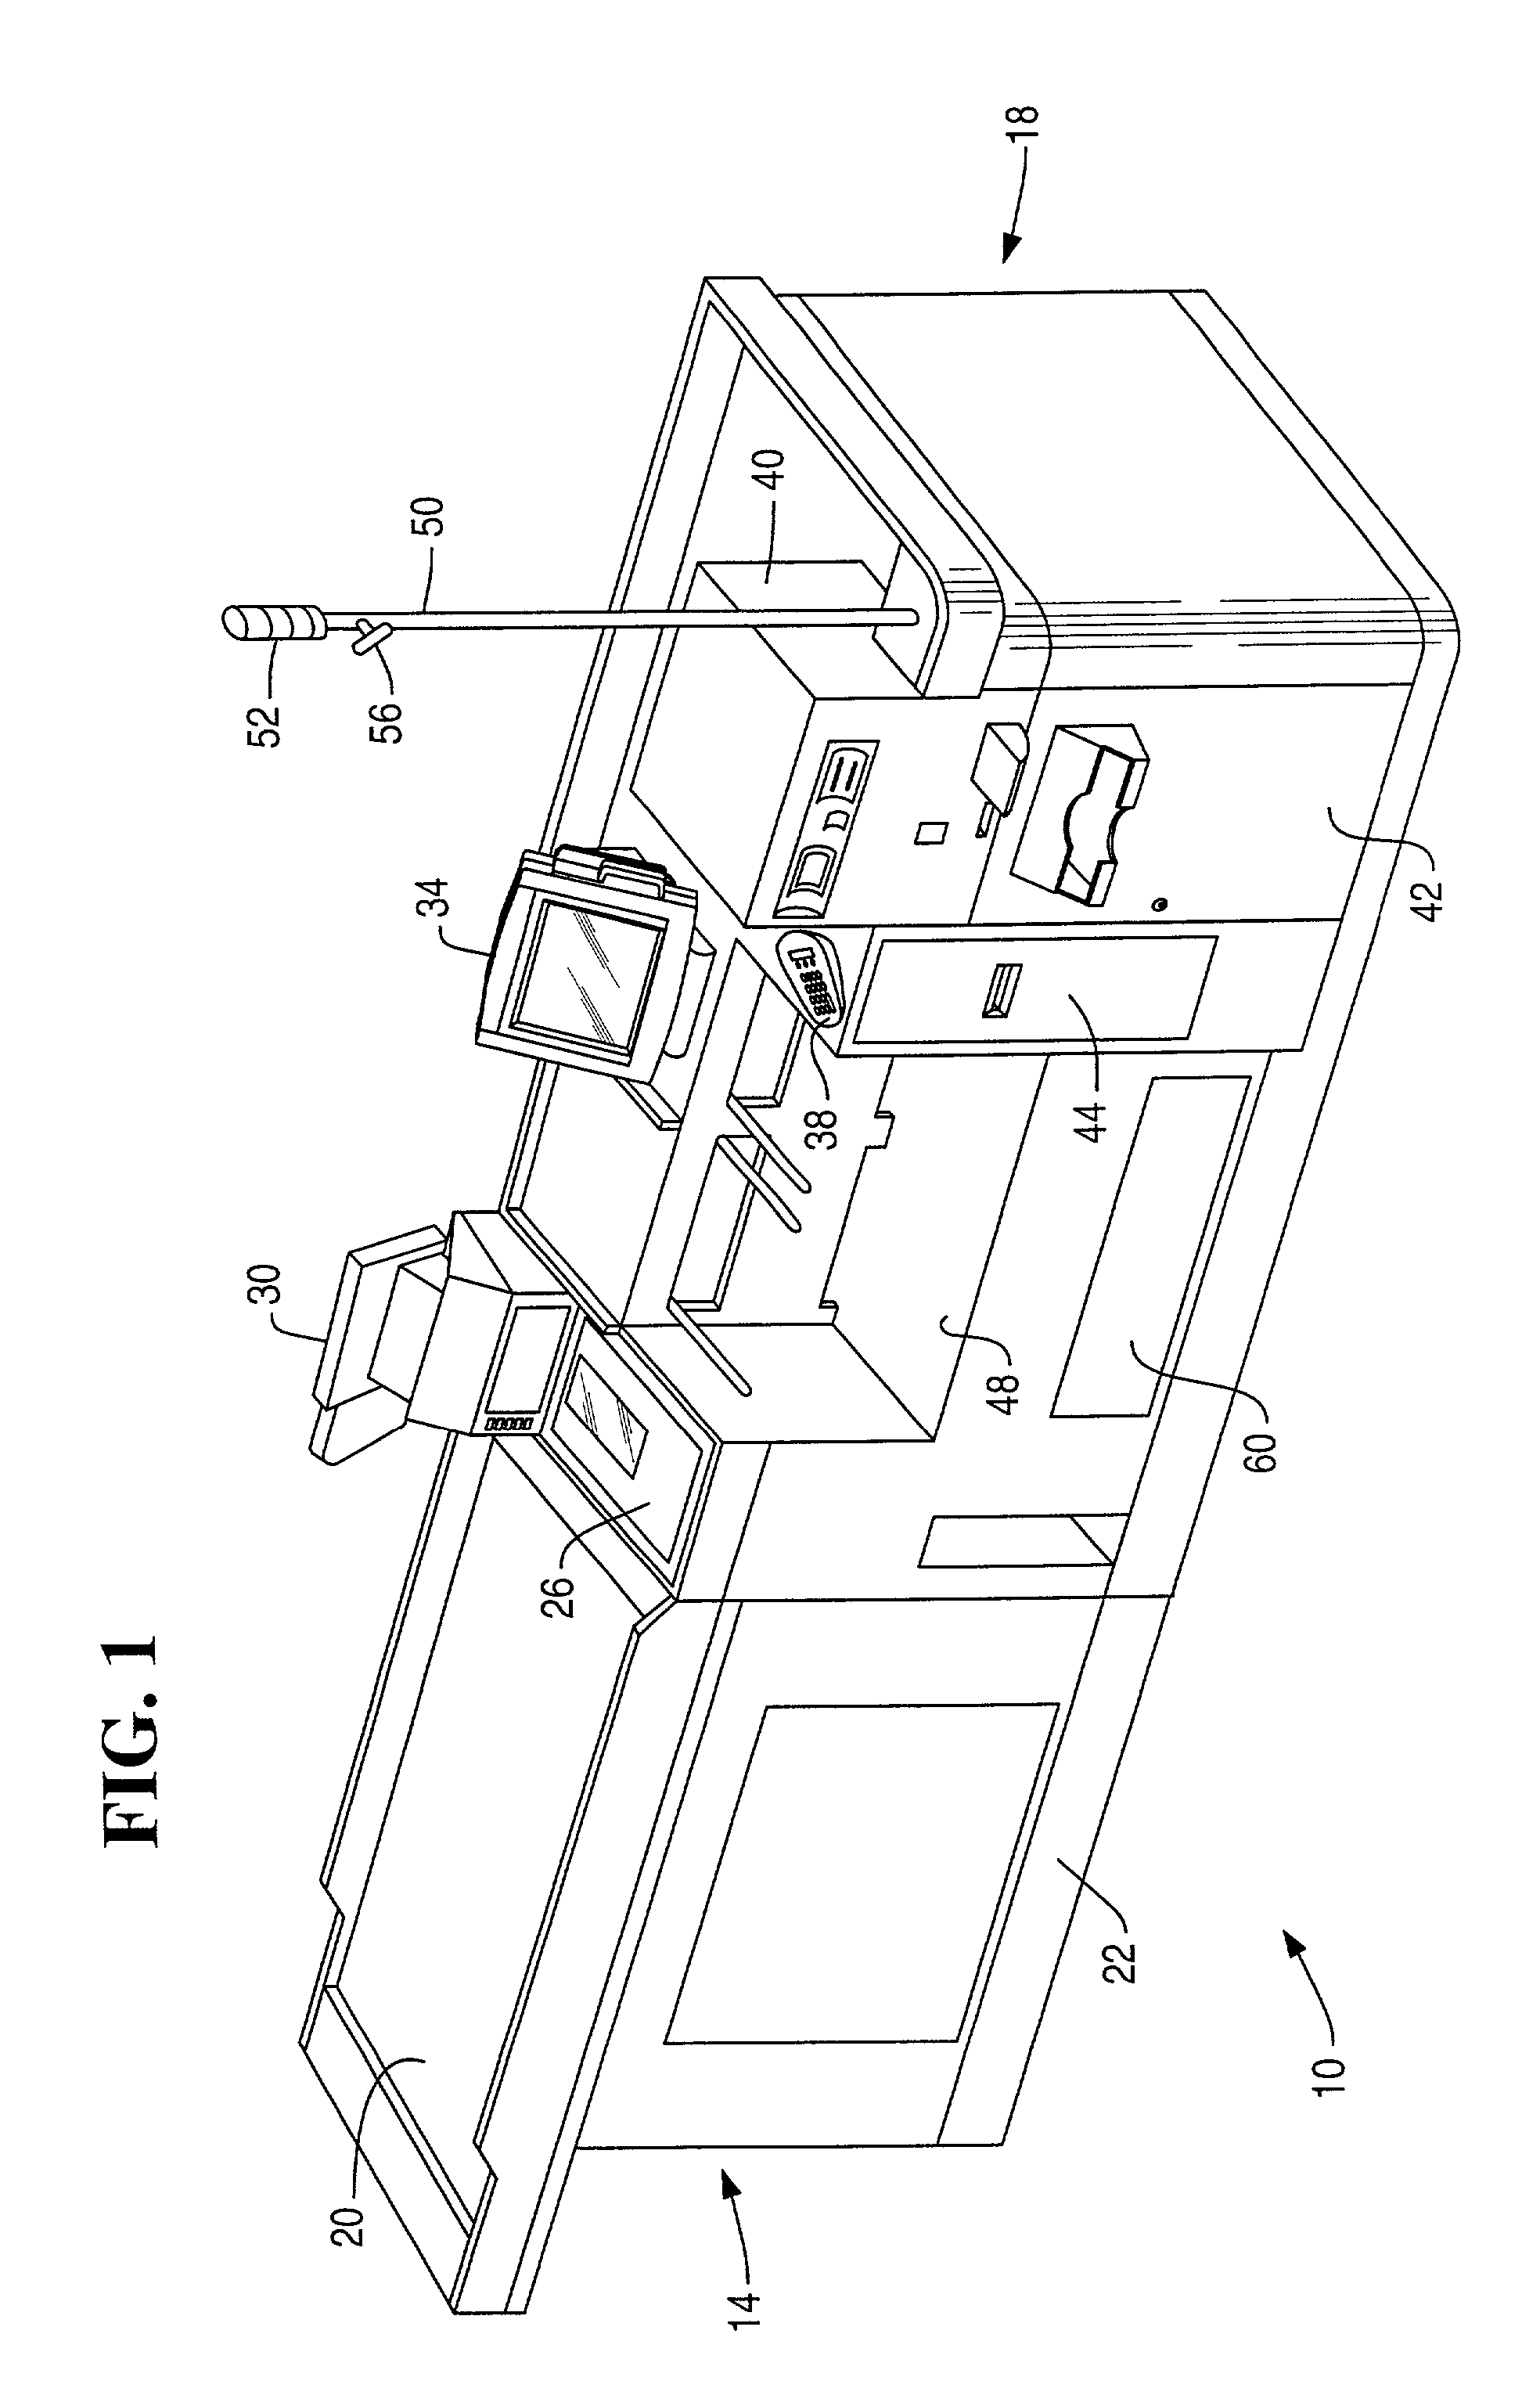 System and method for enhancing security at a self-checkout station